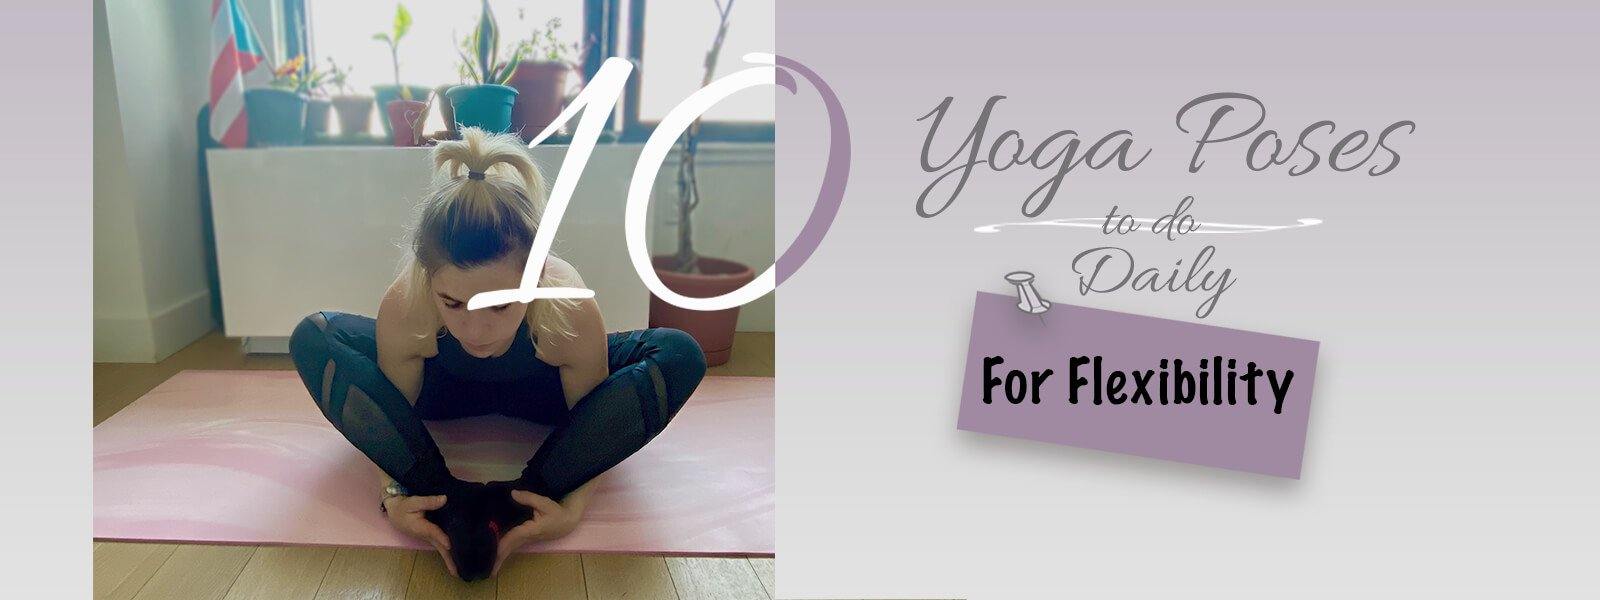 5 Advanced Yoga Poses That Are Fun to Do